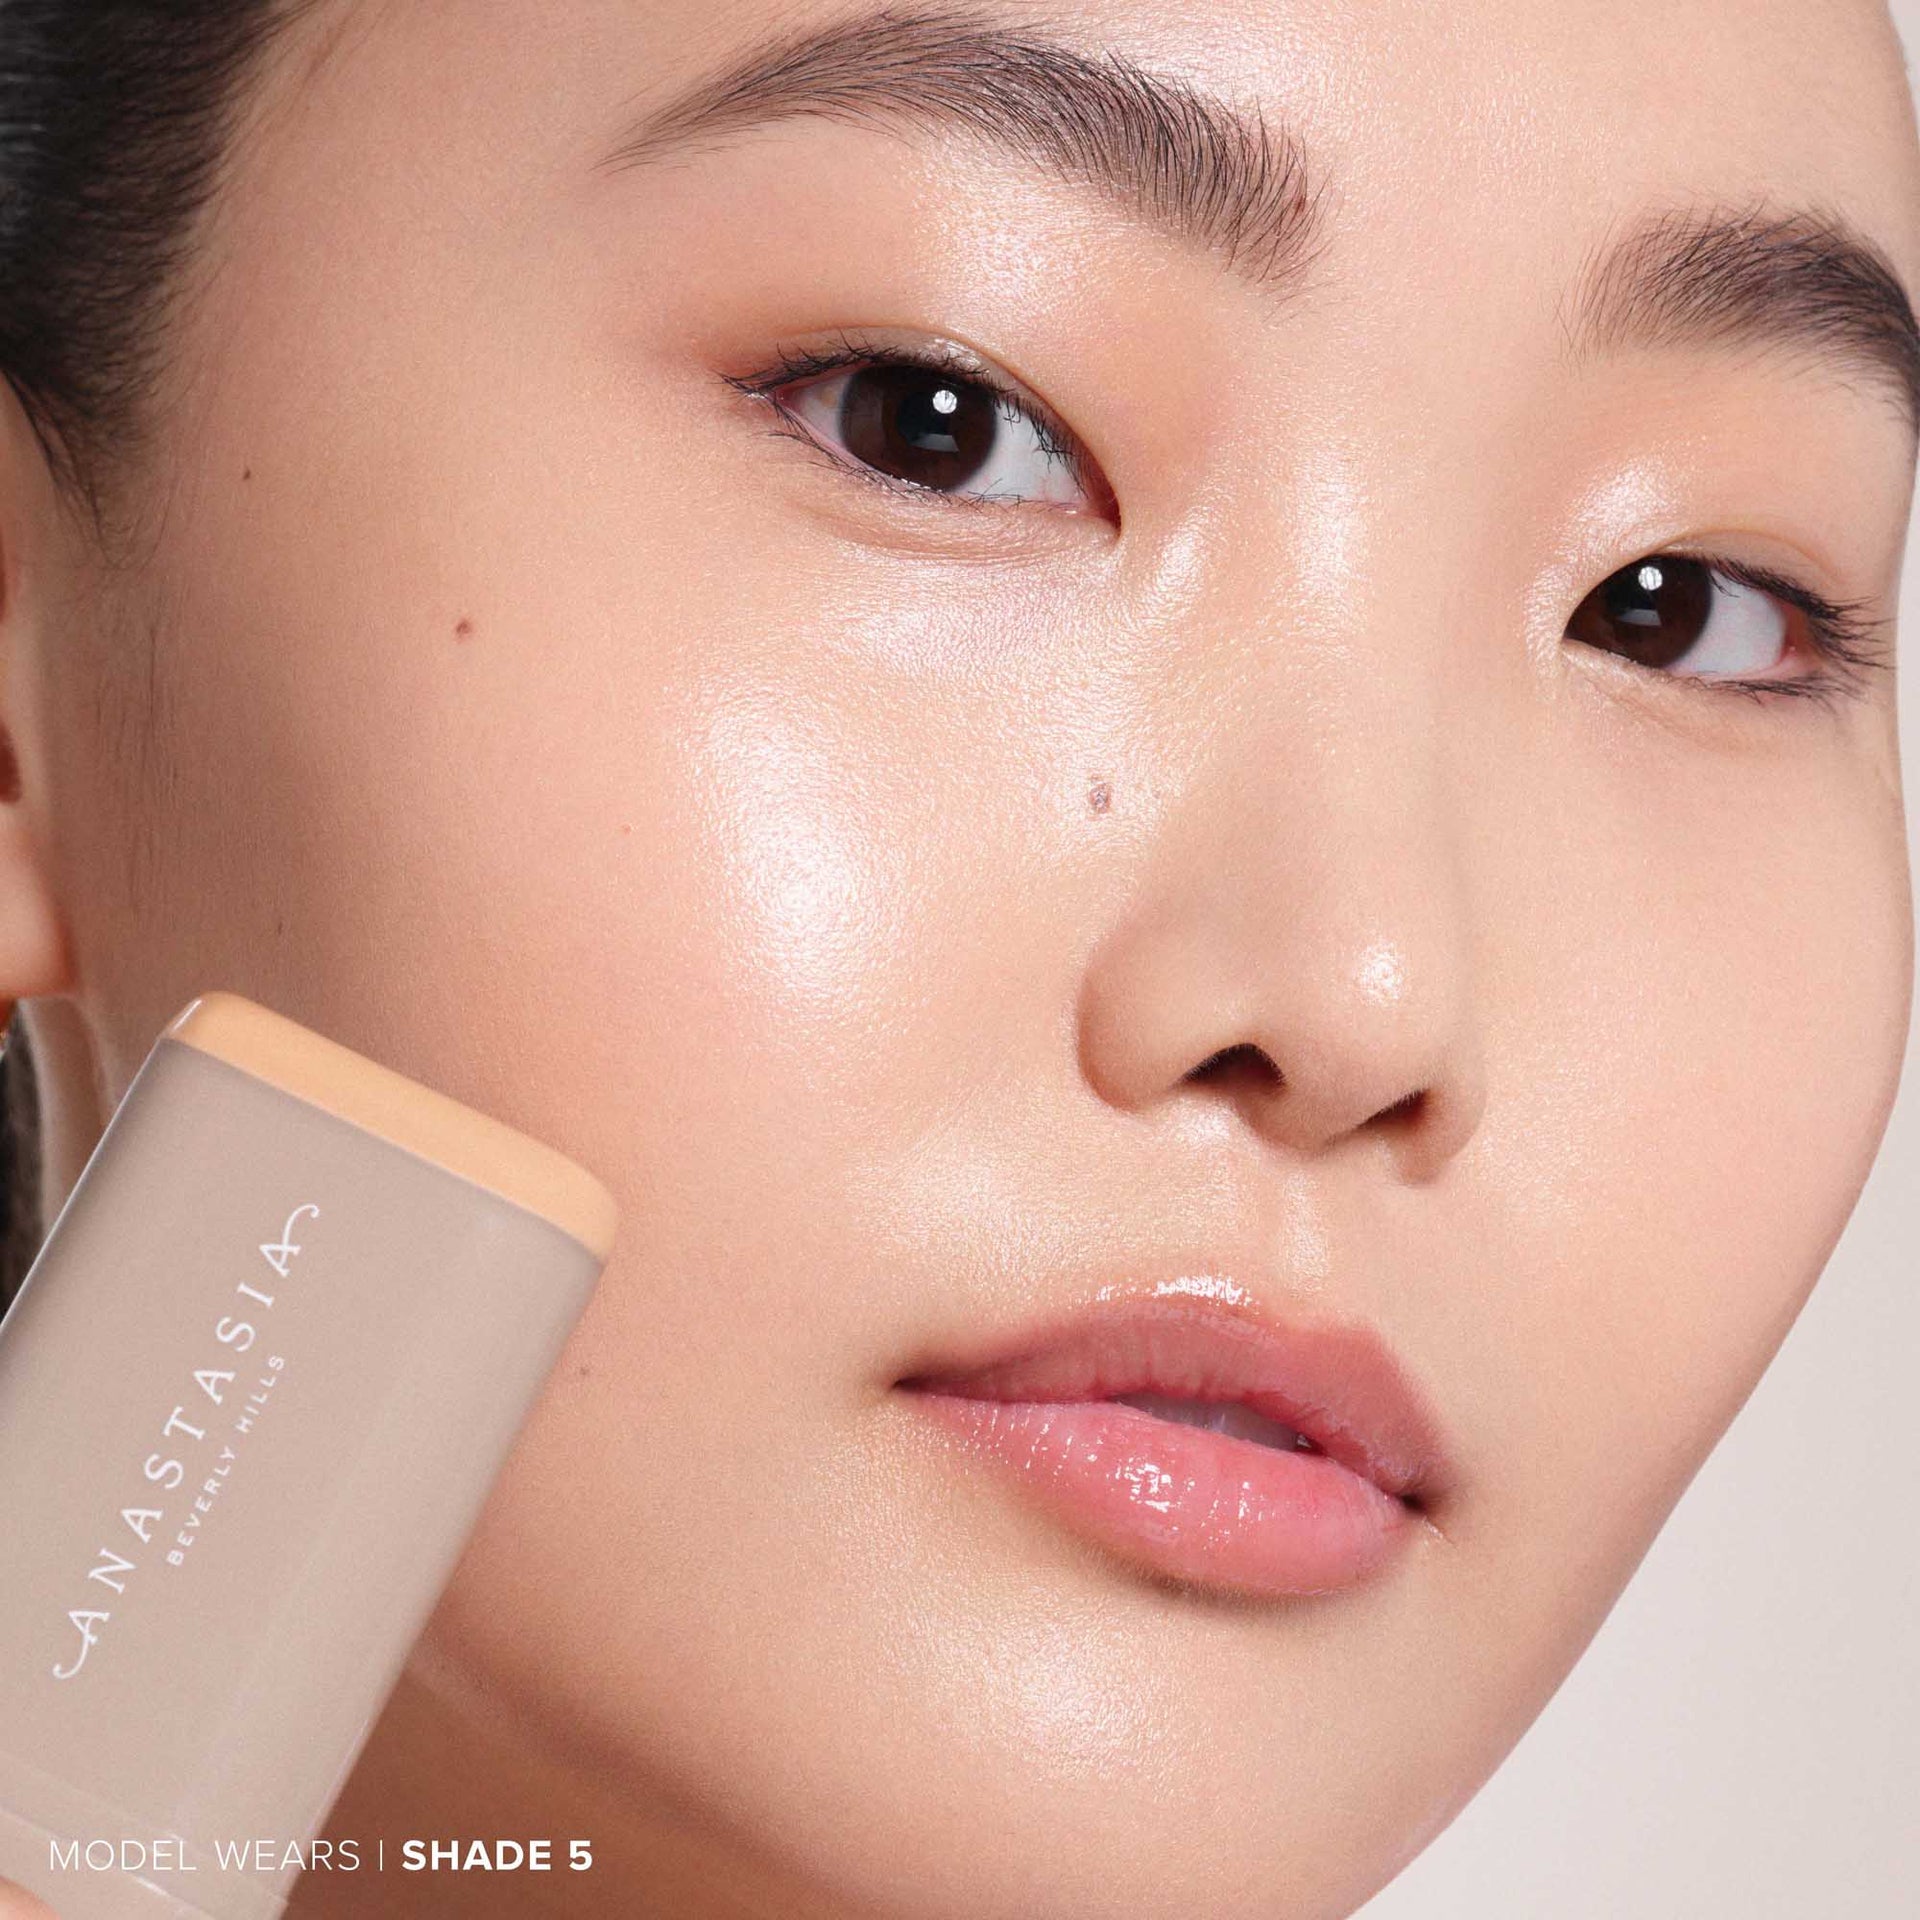 Shade 5 | Beauty Balm Serum Boosted Skin Tint On Model - Shade 5